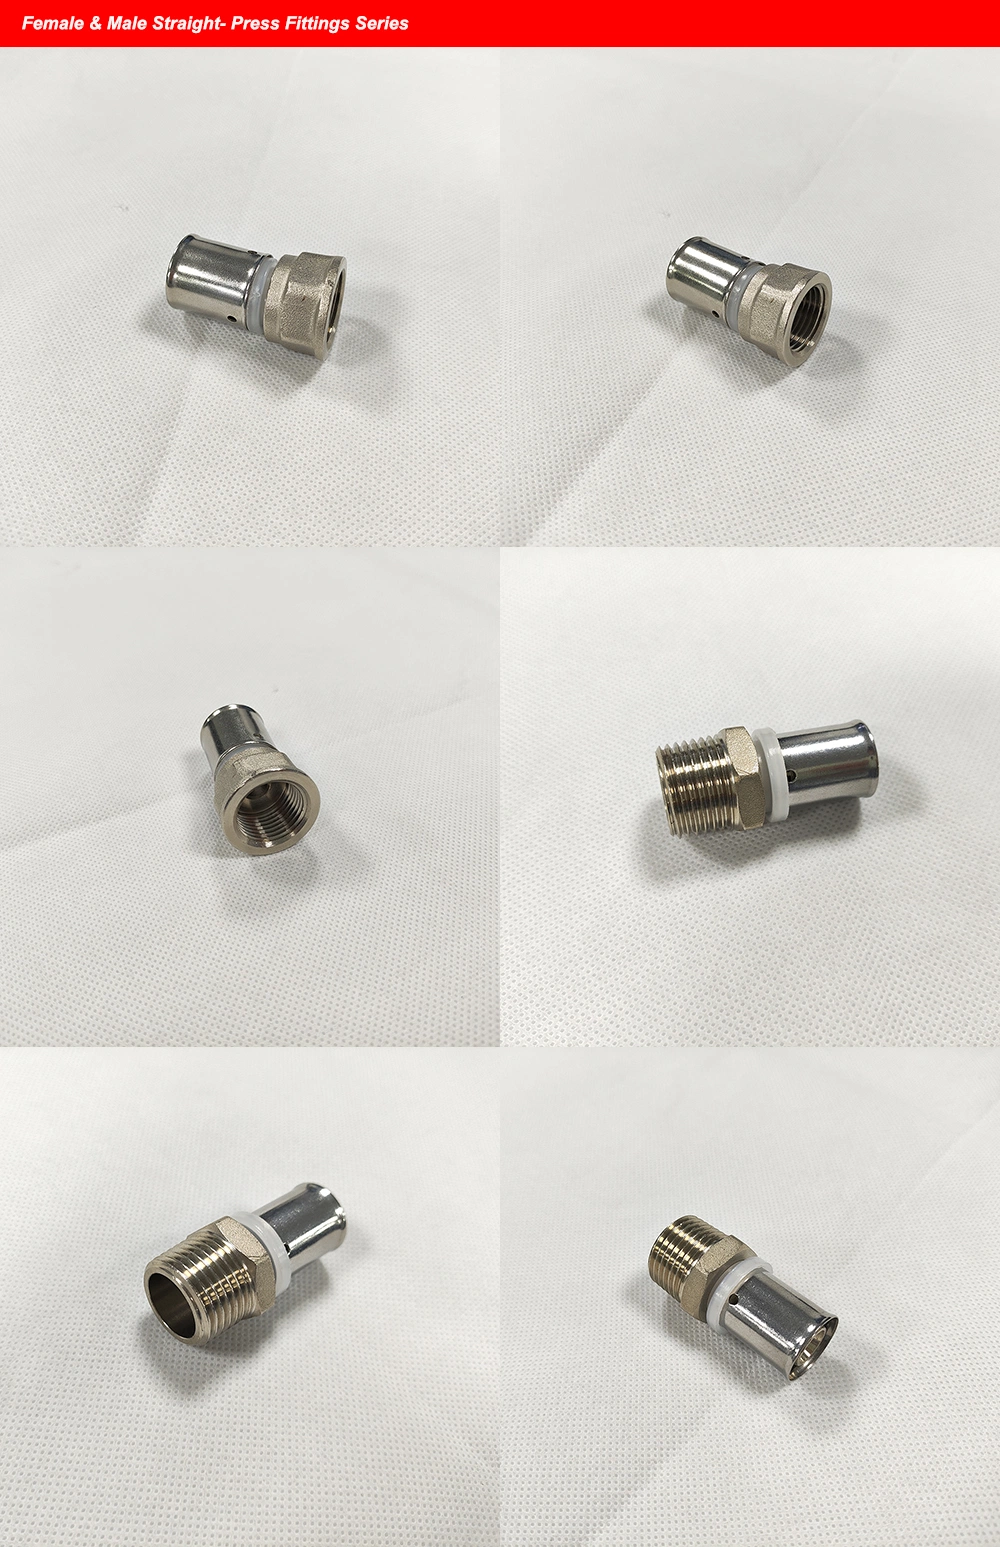 Press Fittings Crimping Pipe Fittings for Pex Pipe and Multilayer Pipe Male Straight